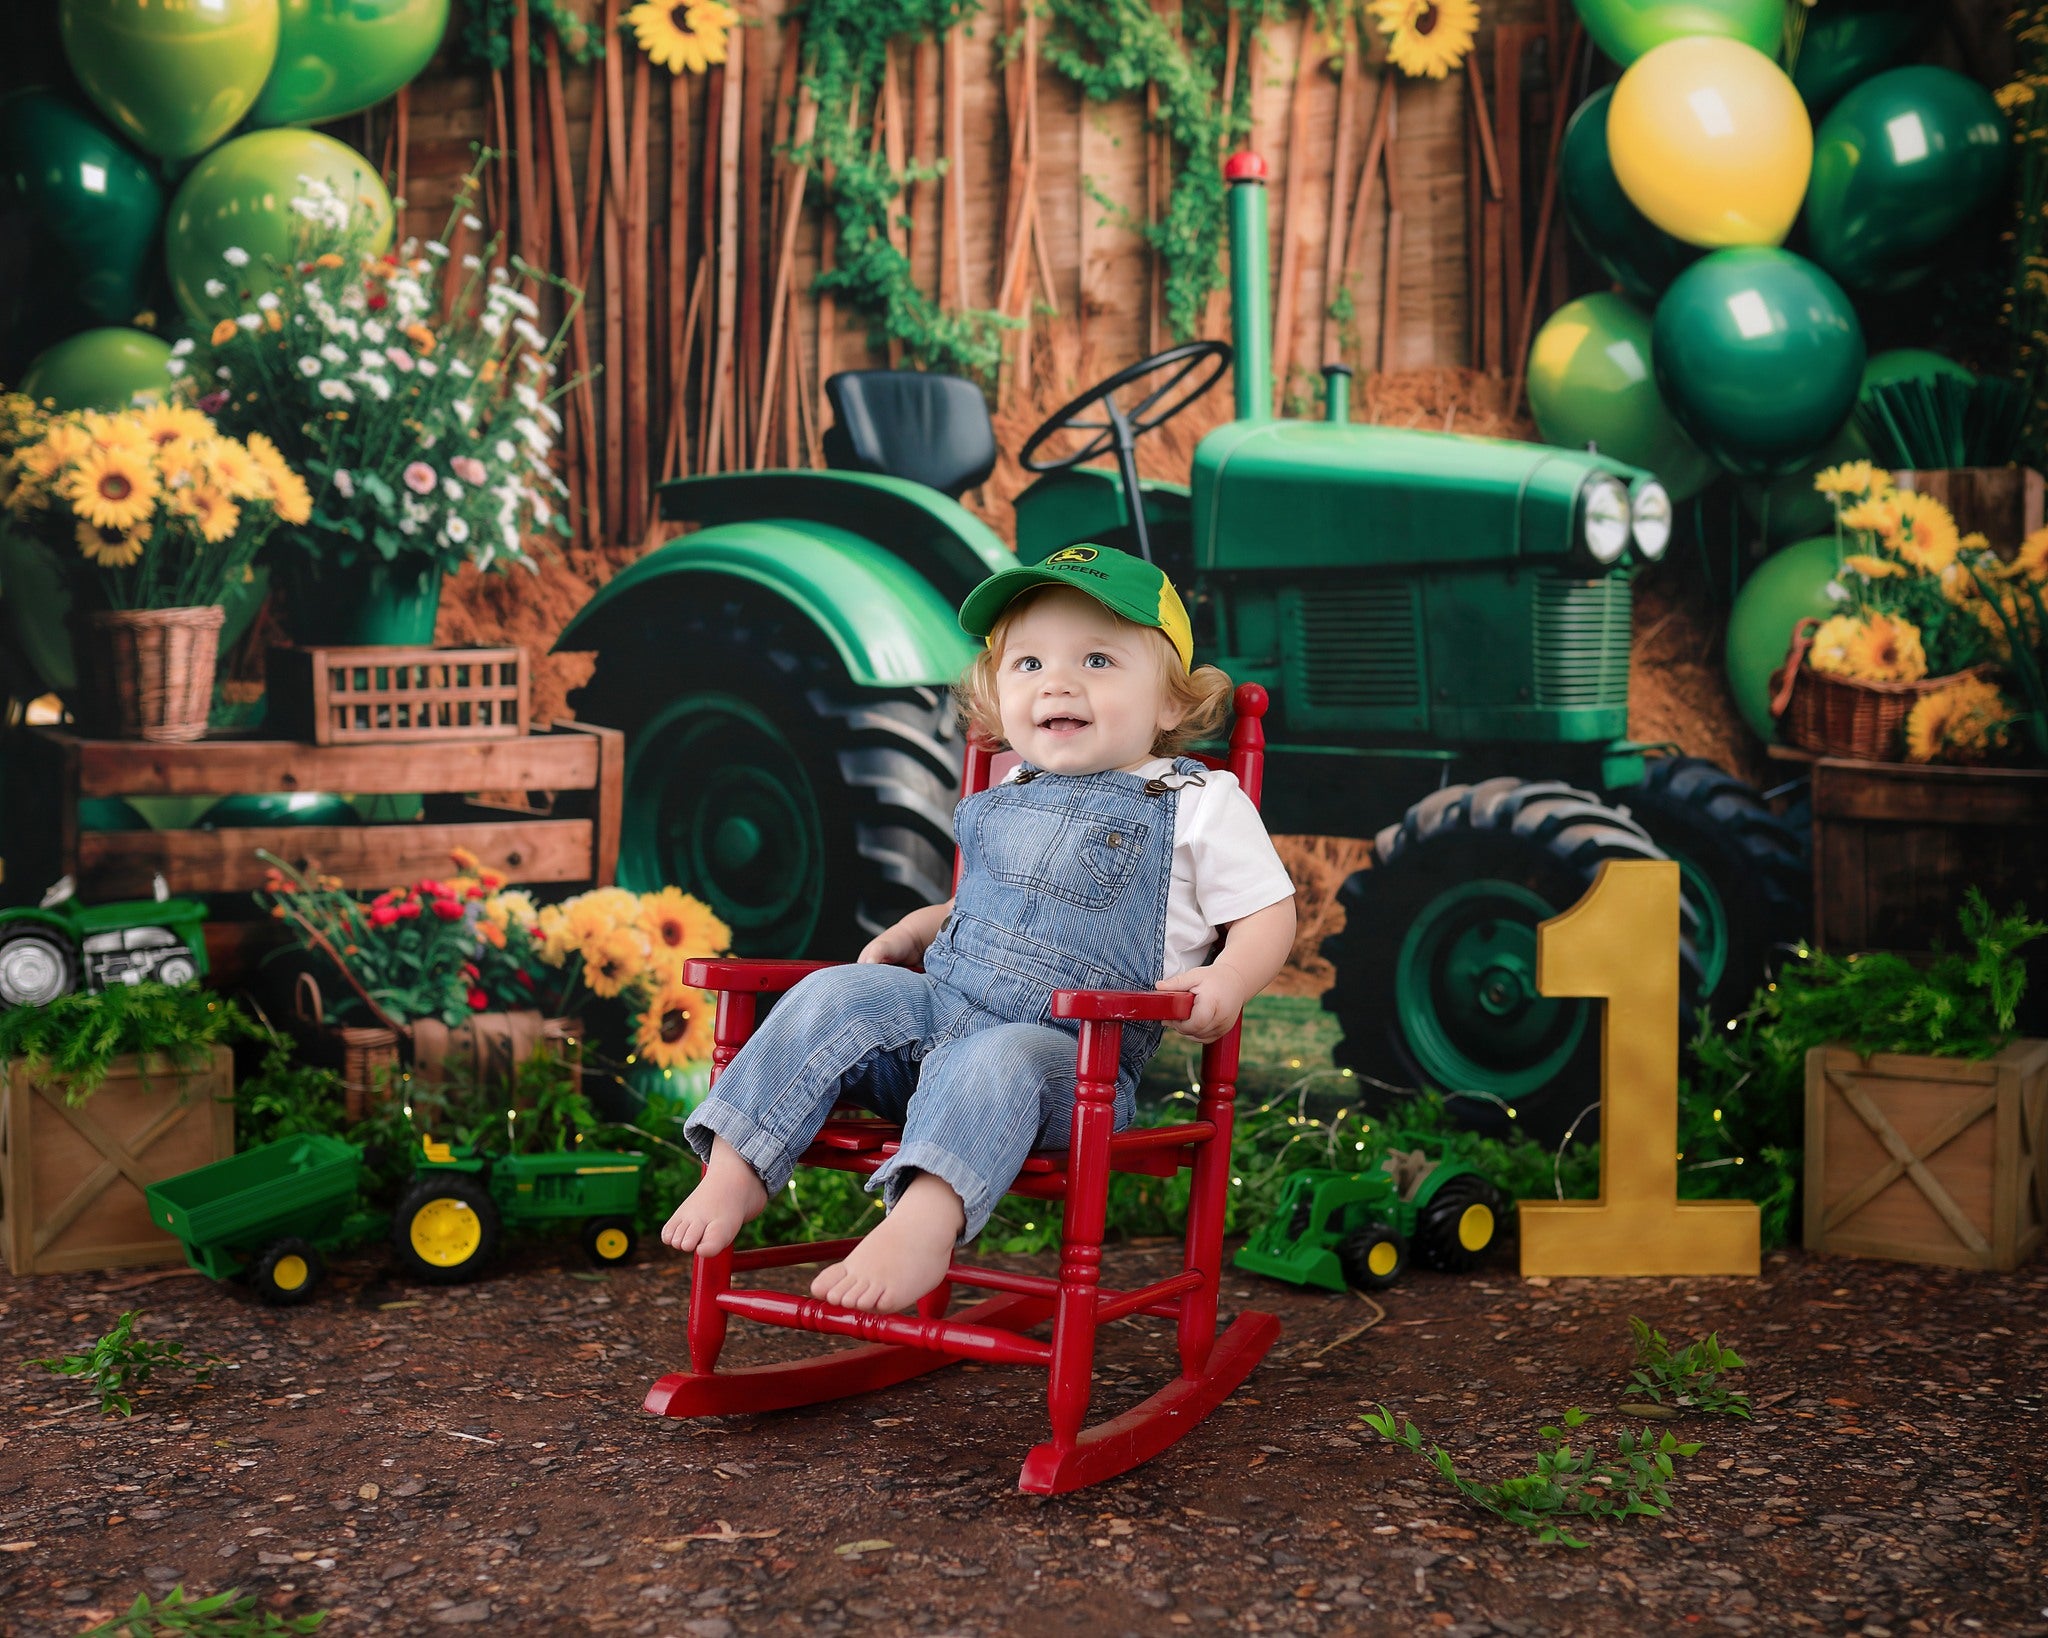 Kate St. Patrick's Day Buggy Backdrop Designed by Emetselch